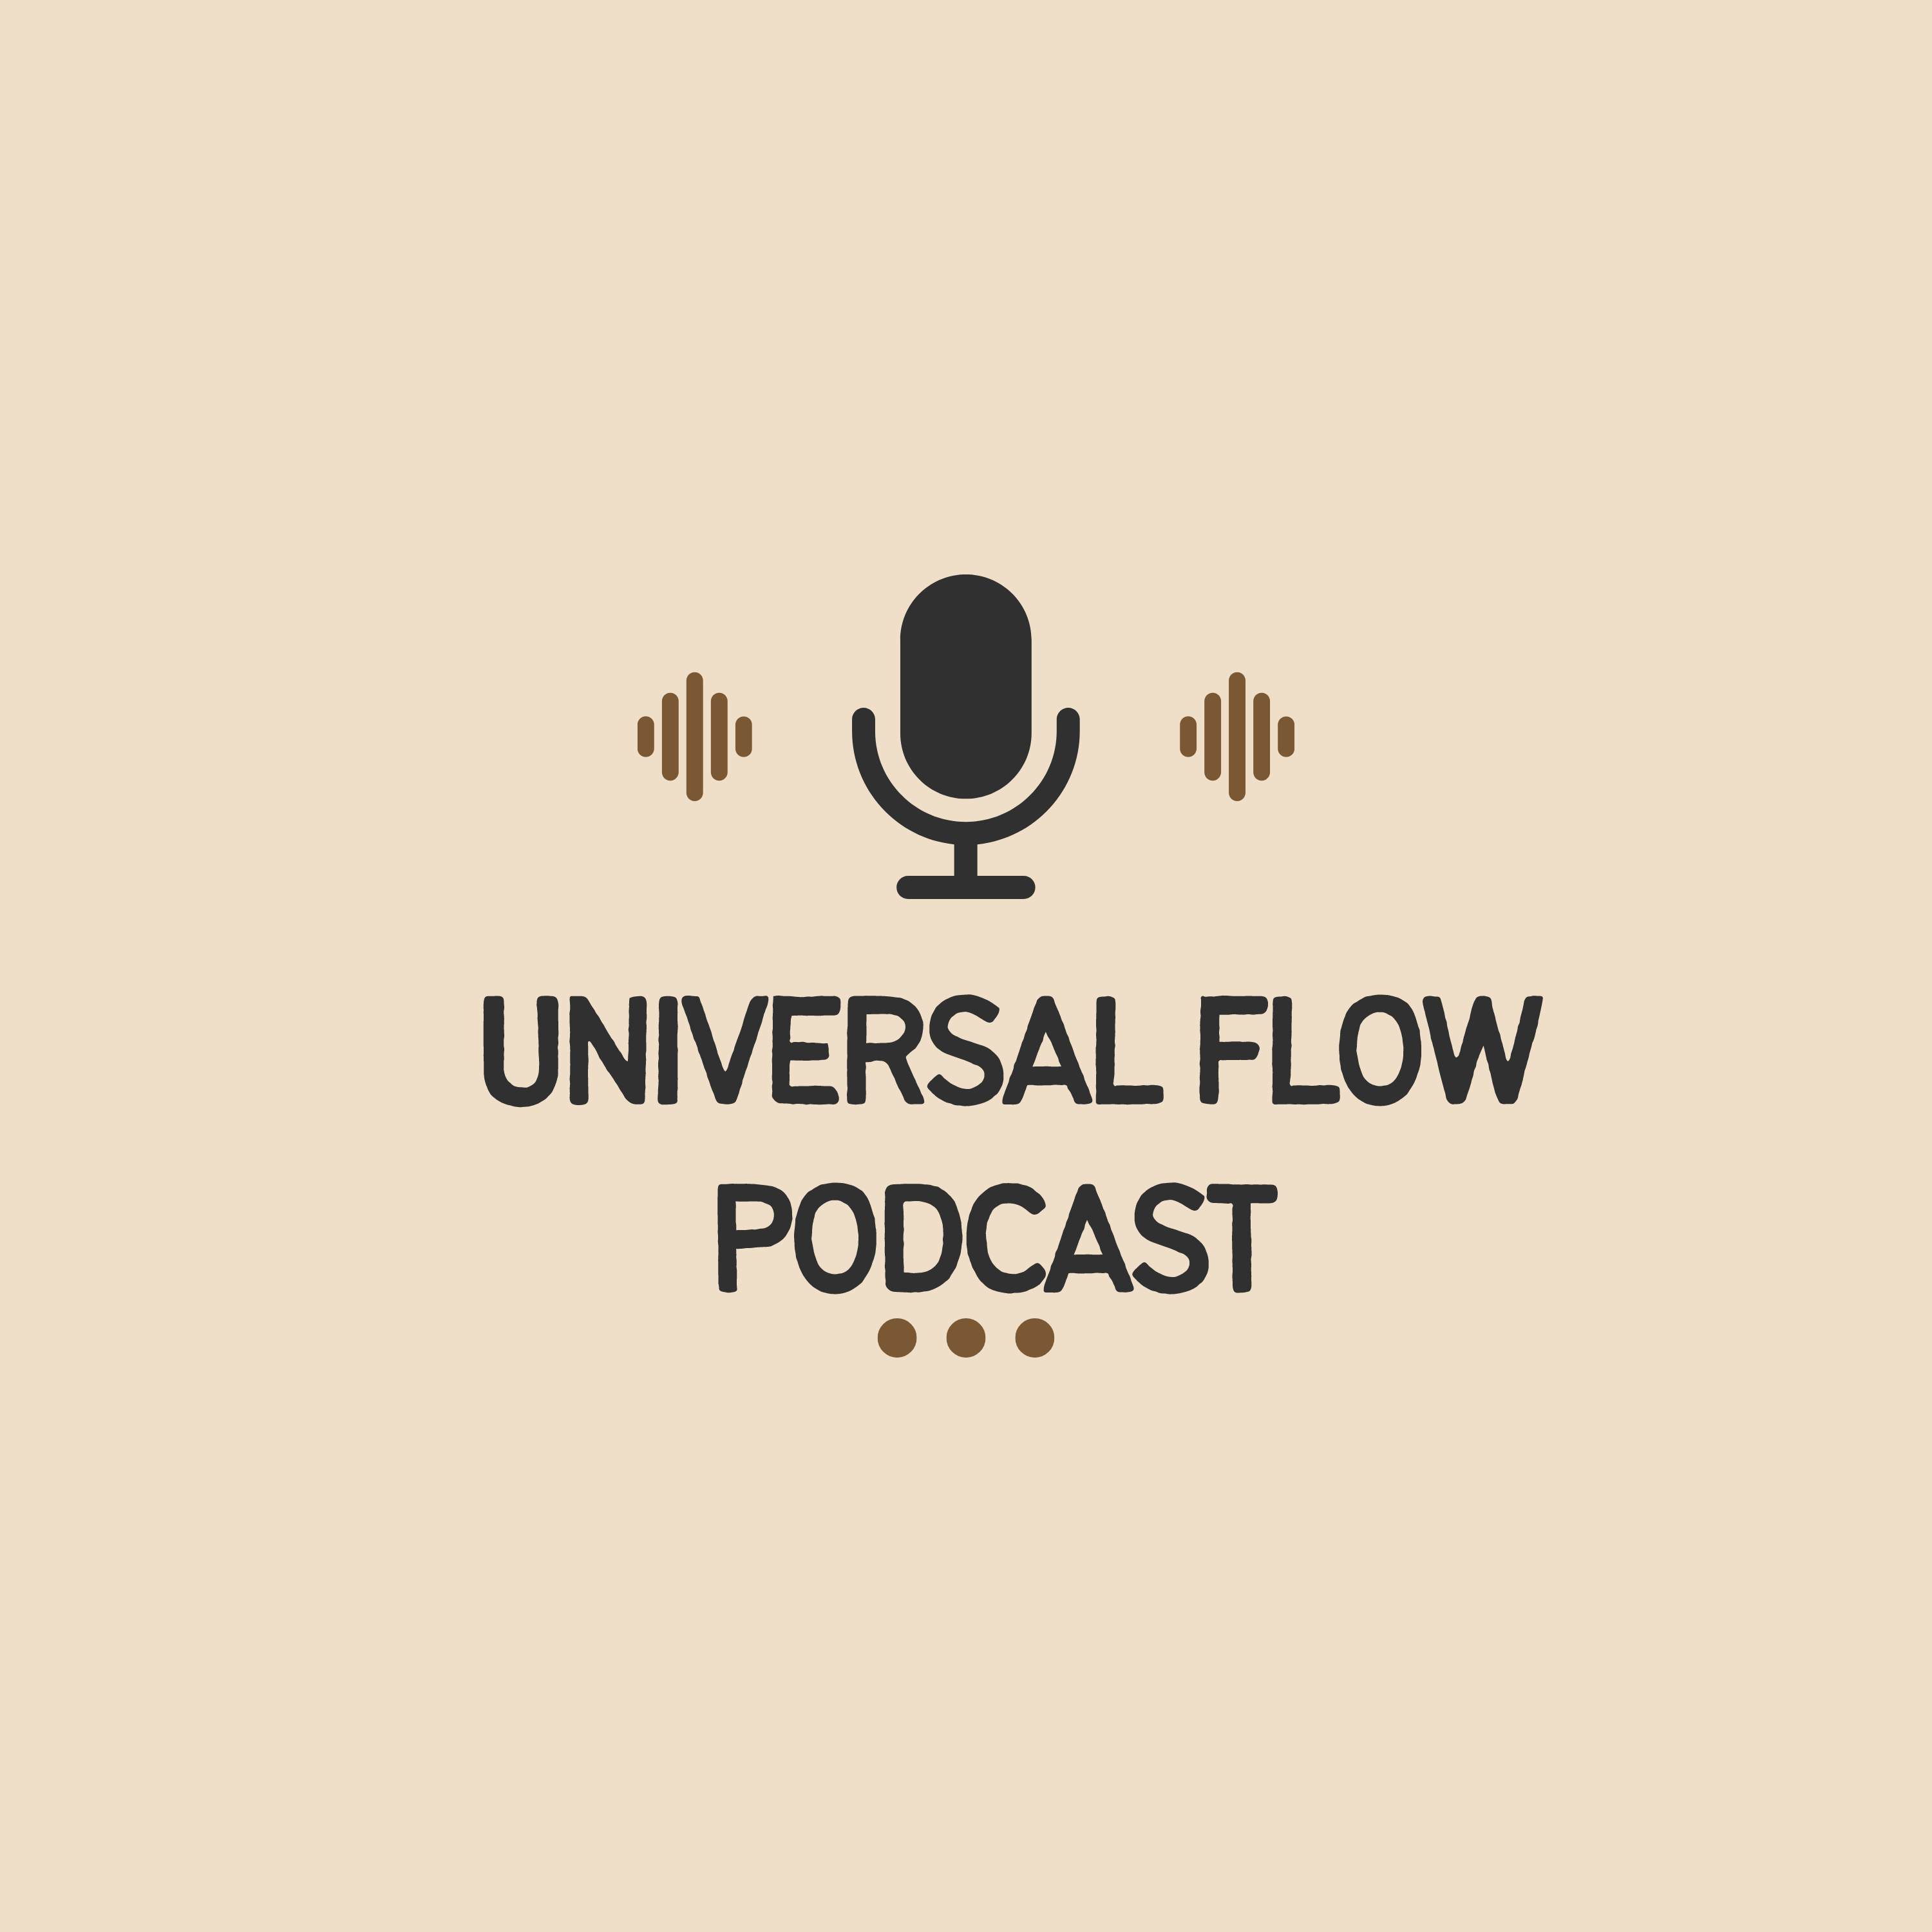 The Universal Flow Podcast